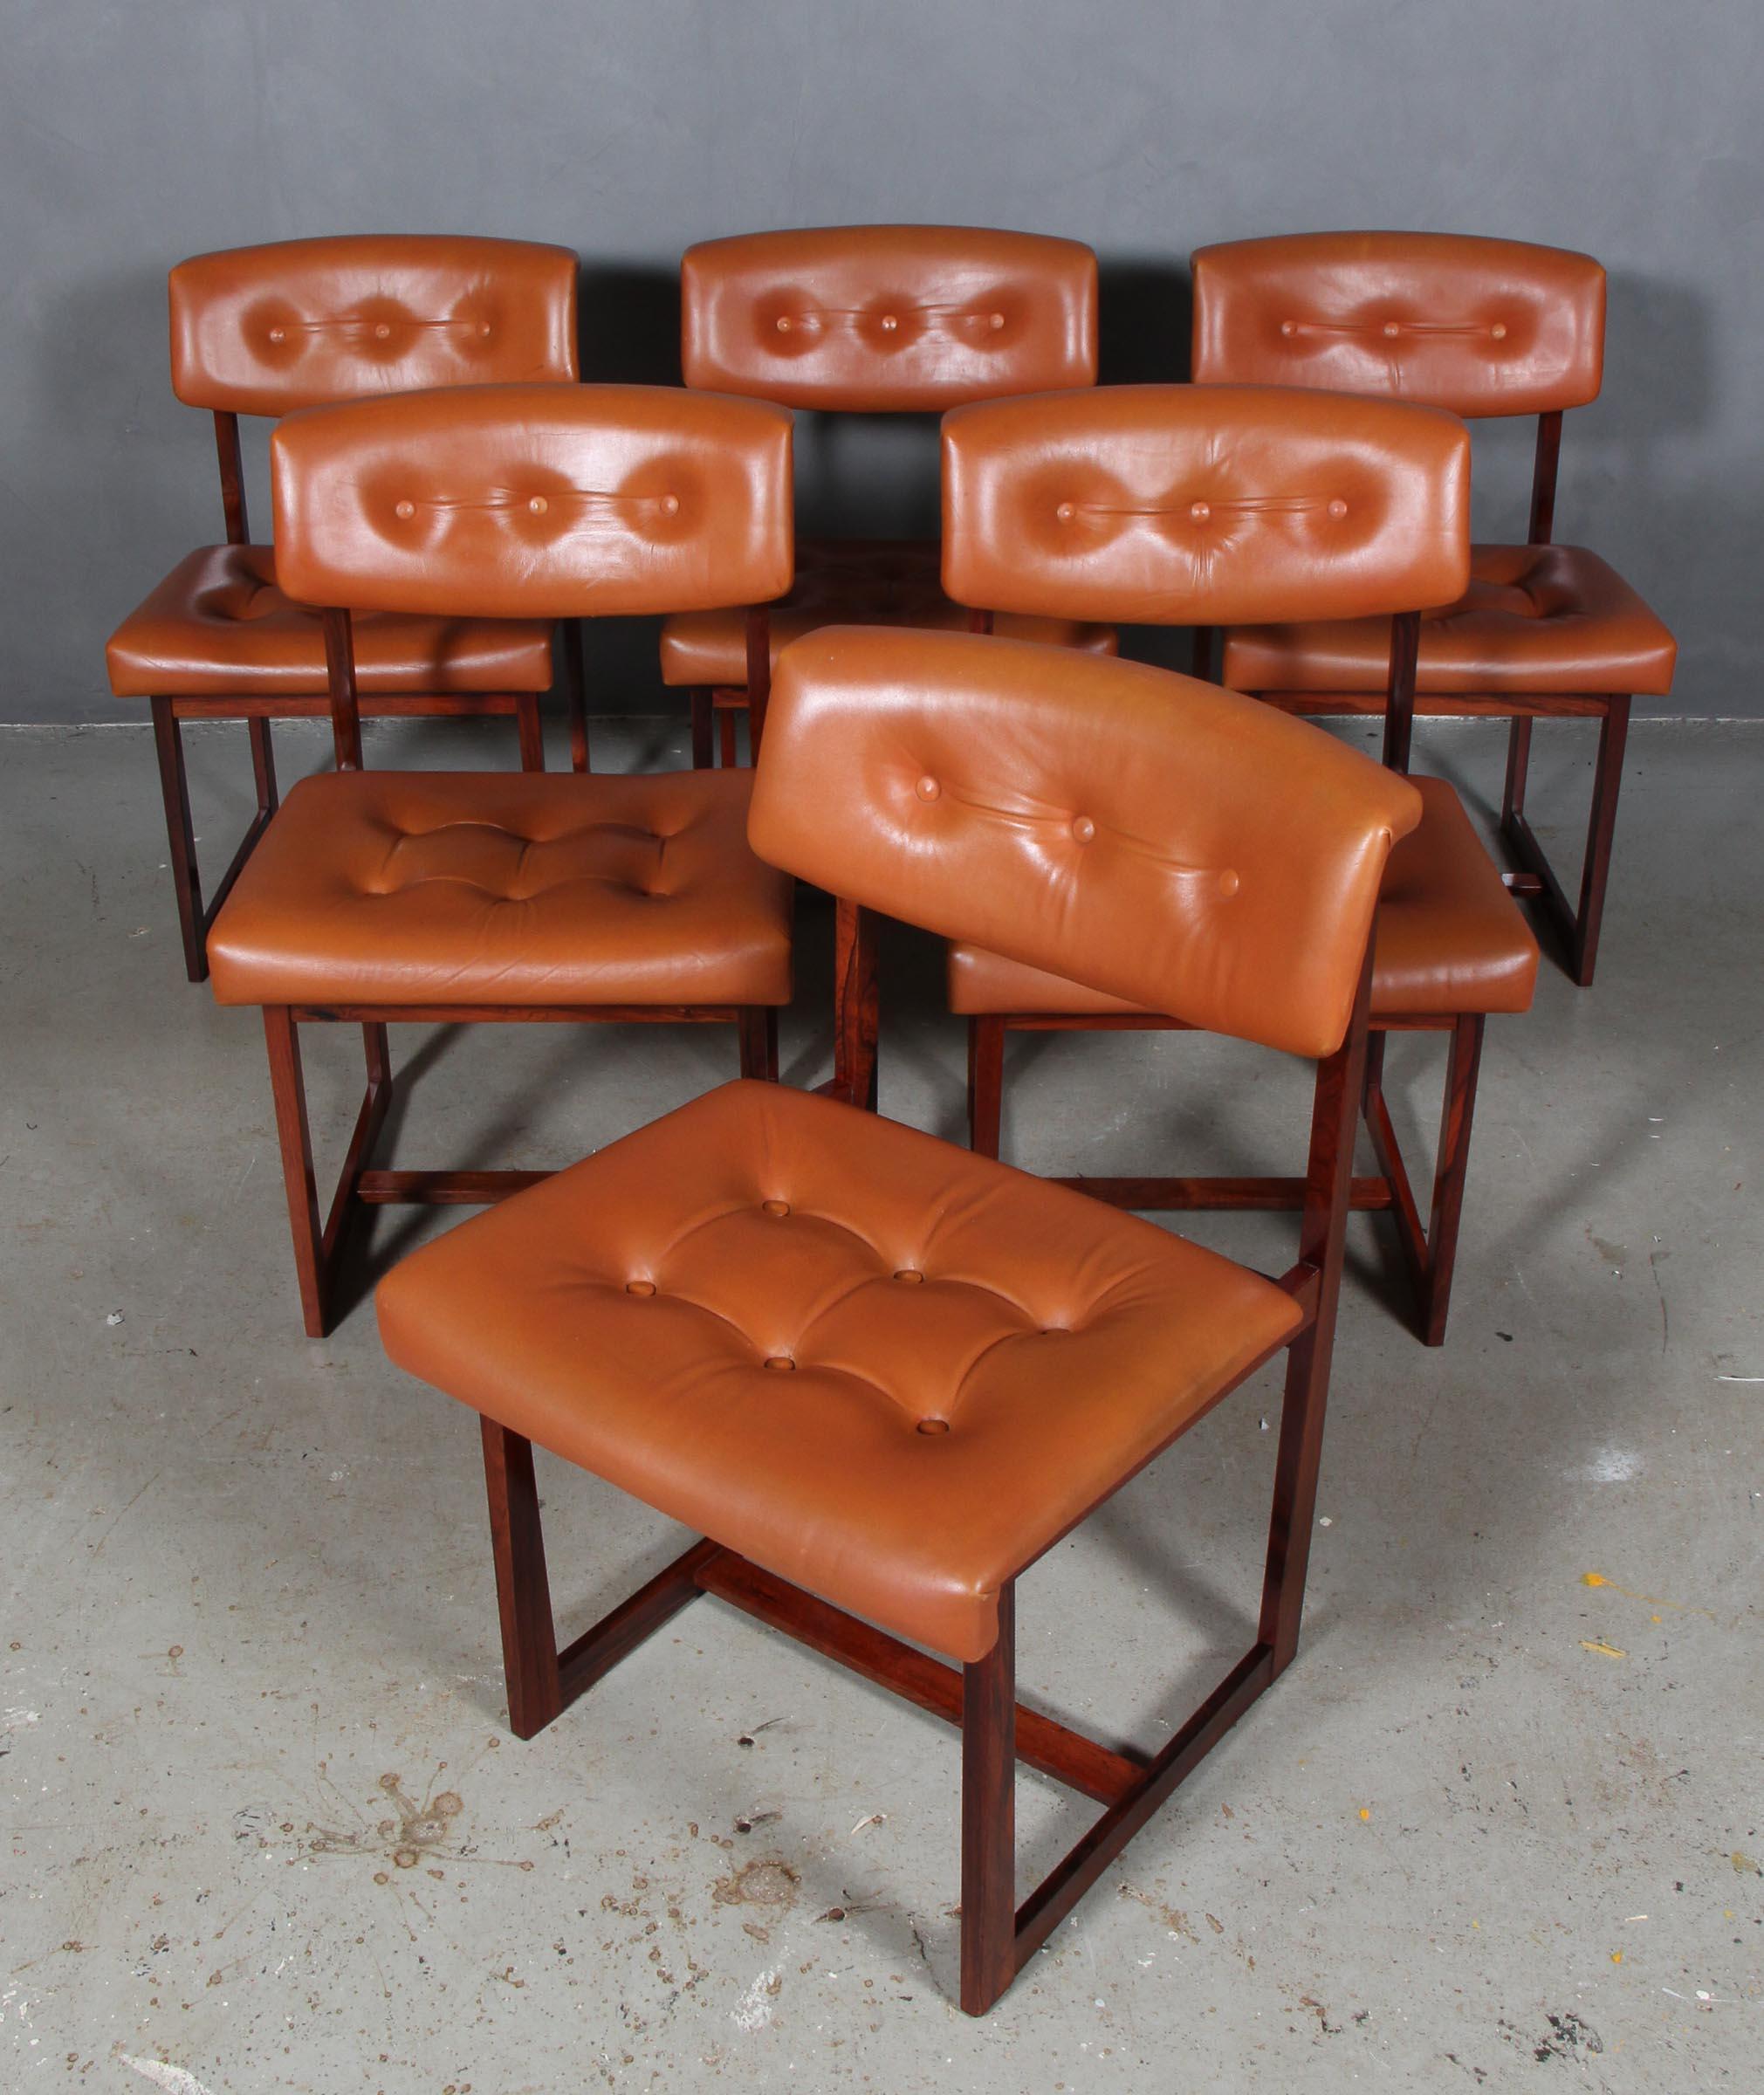 Henning Sørensen set of six dining chairs in rosewood.

Original upholstered with tan aniline leather.

Made by Dan-EX in the 1960s.